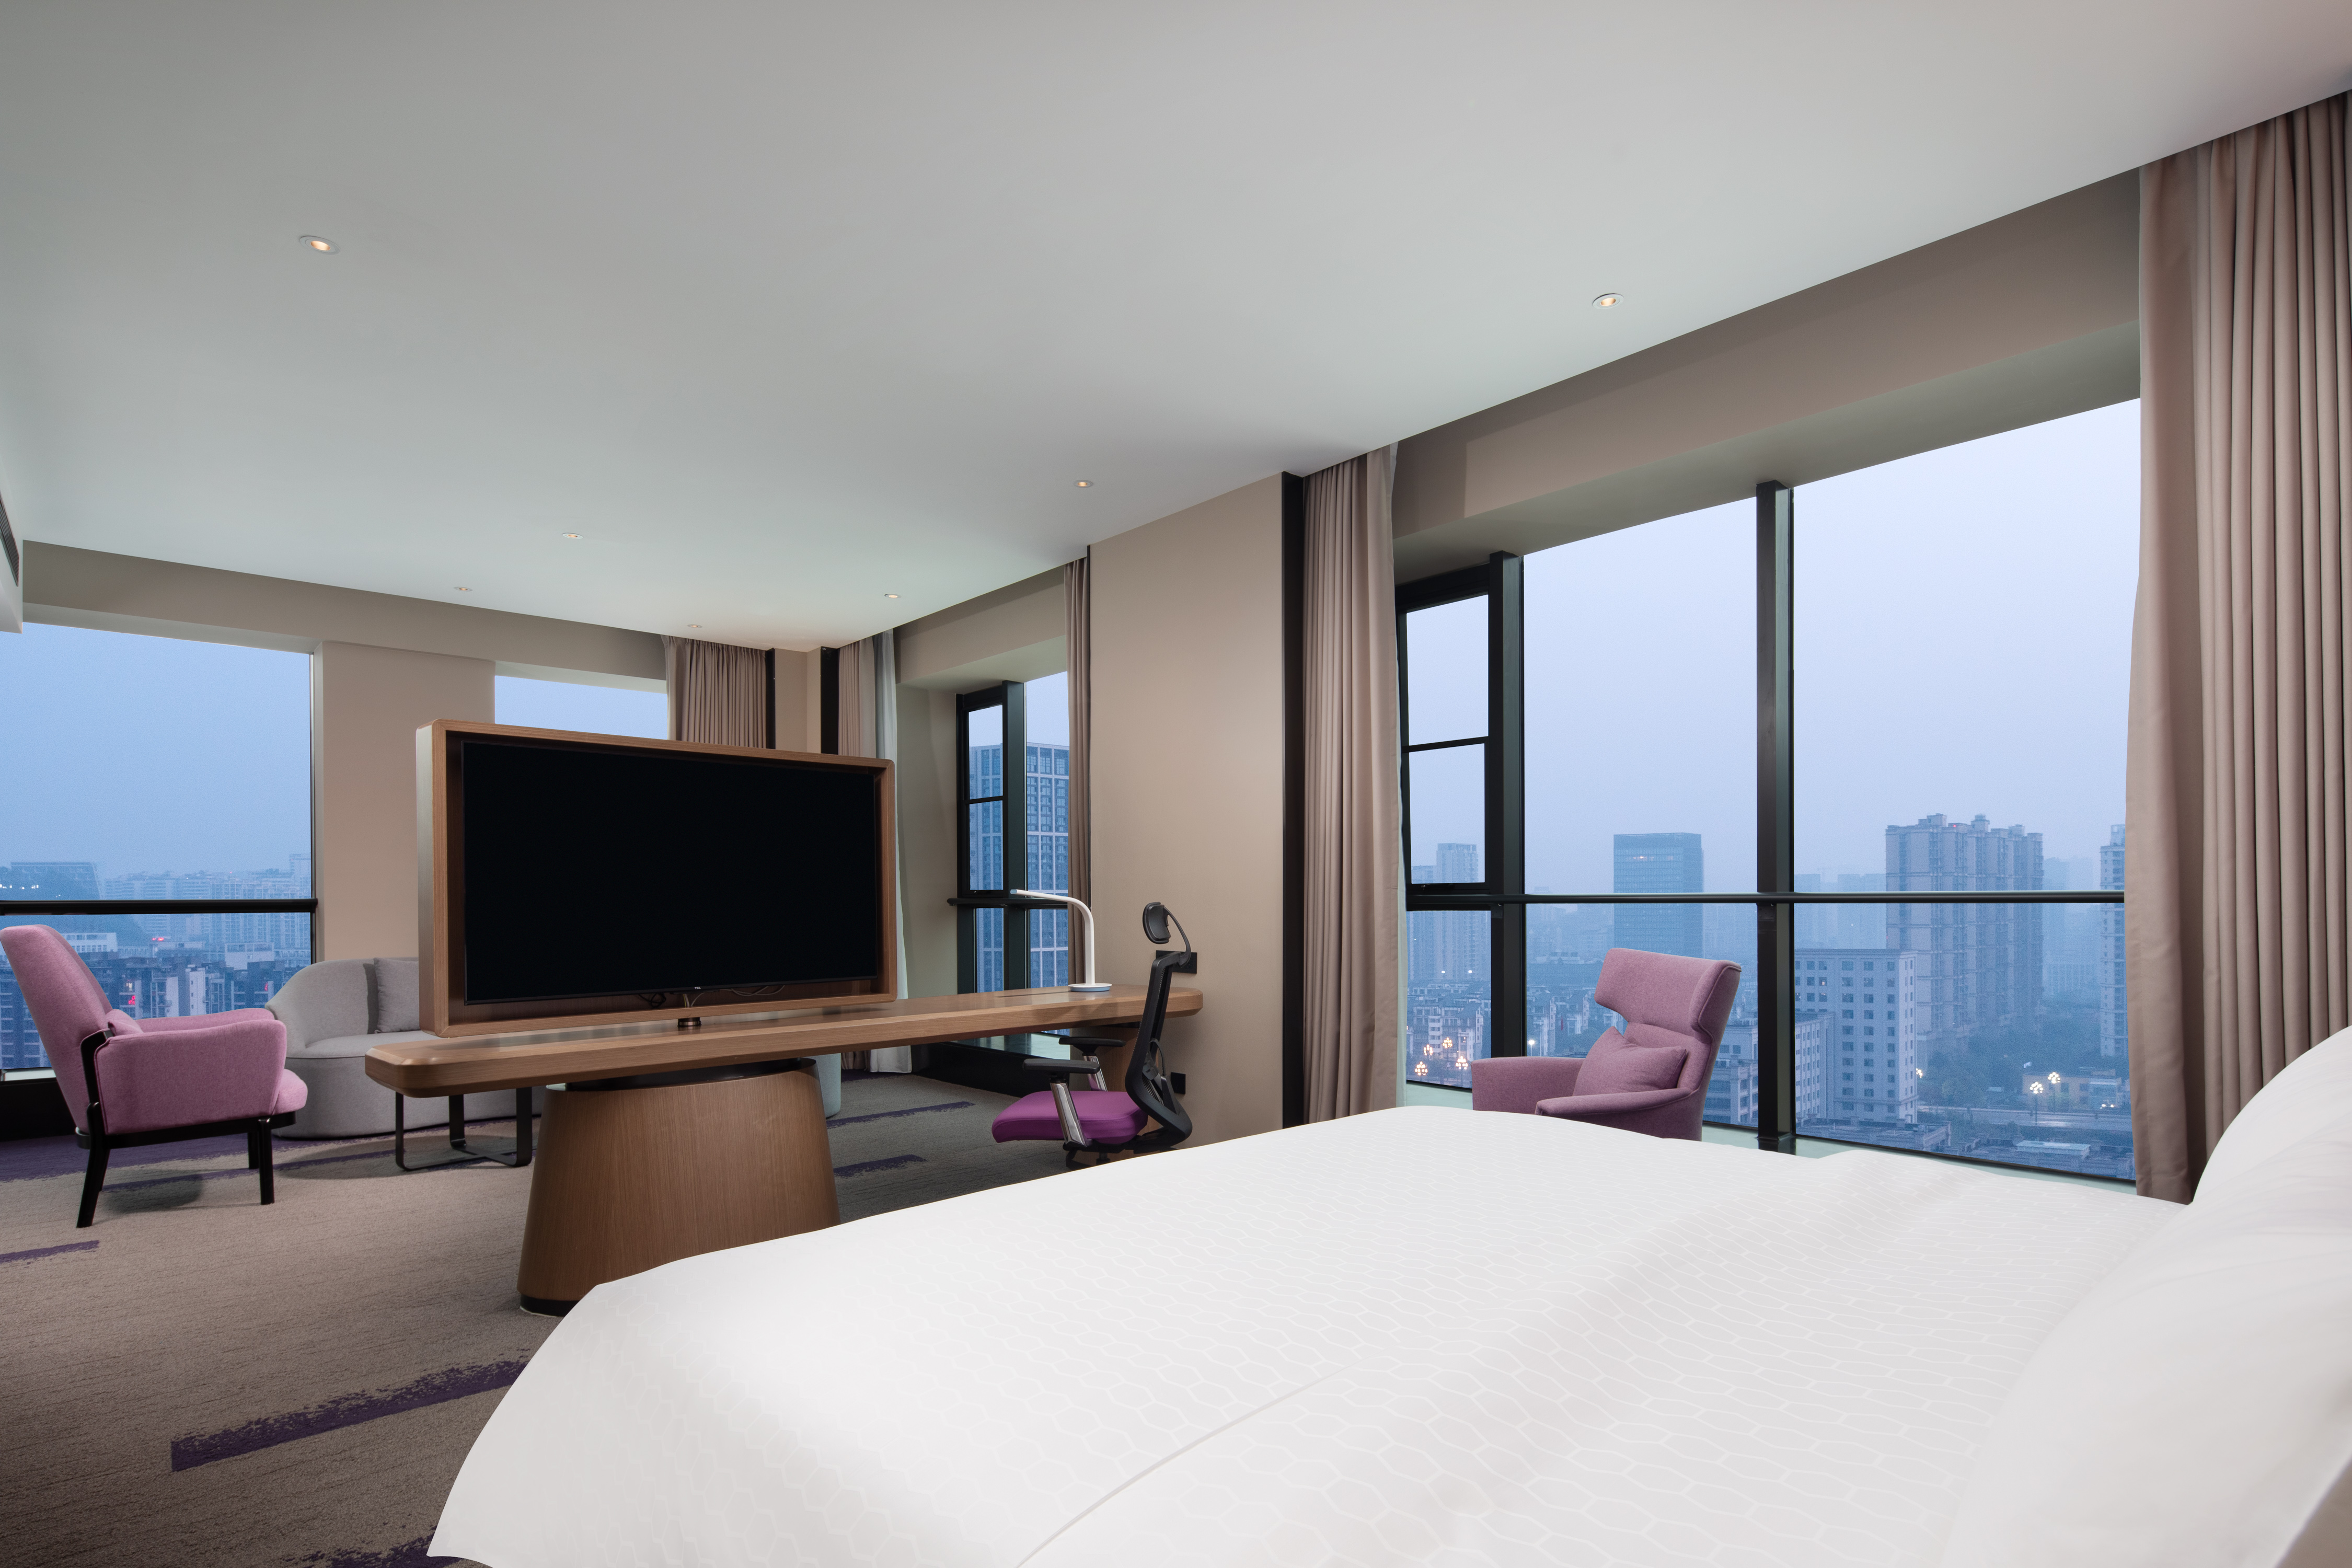 guest suite, 1 king bed, tv, work desk, window view of the city